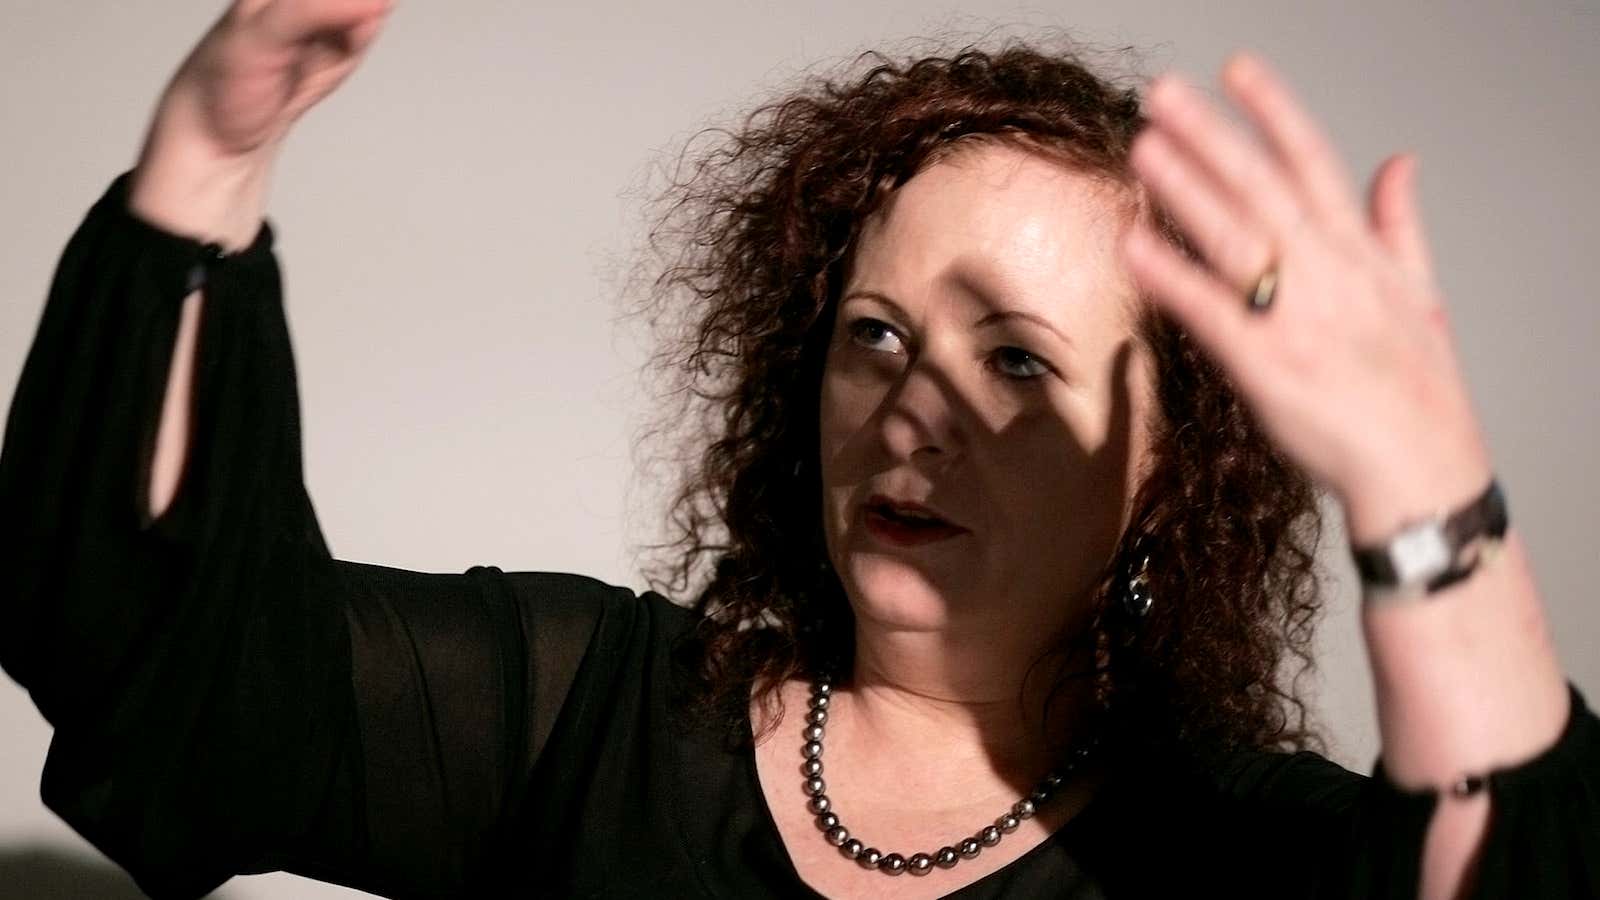 Nan Goldin is coming out of the shadows about her opioid addiction.